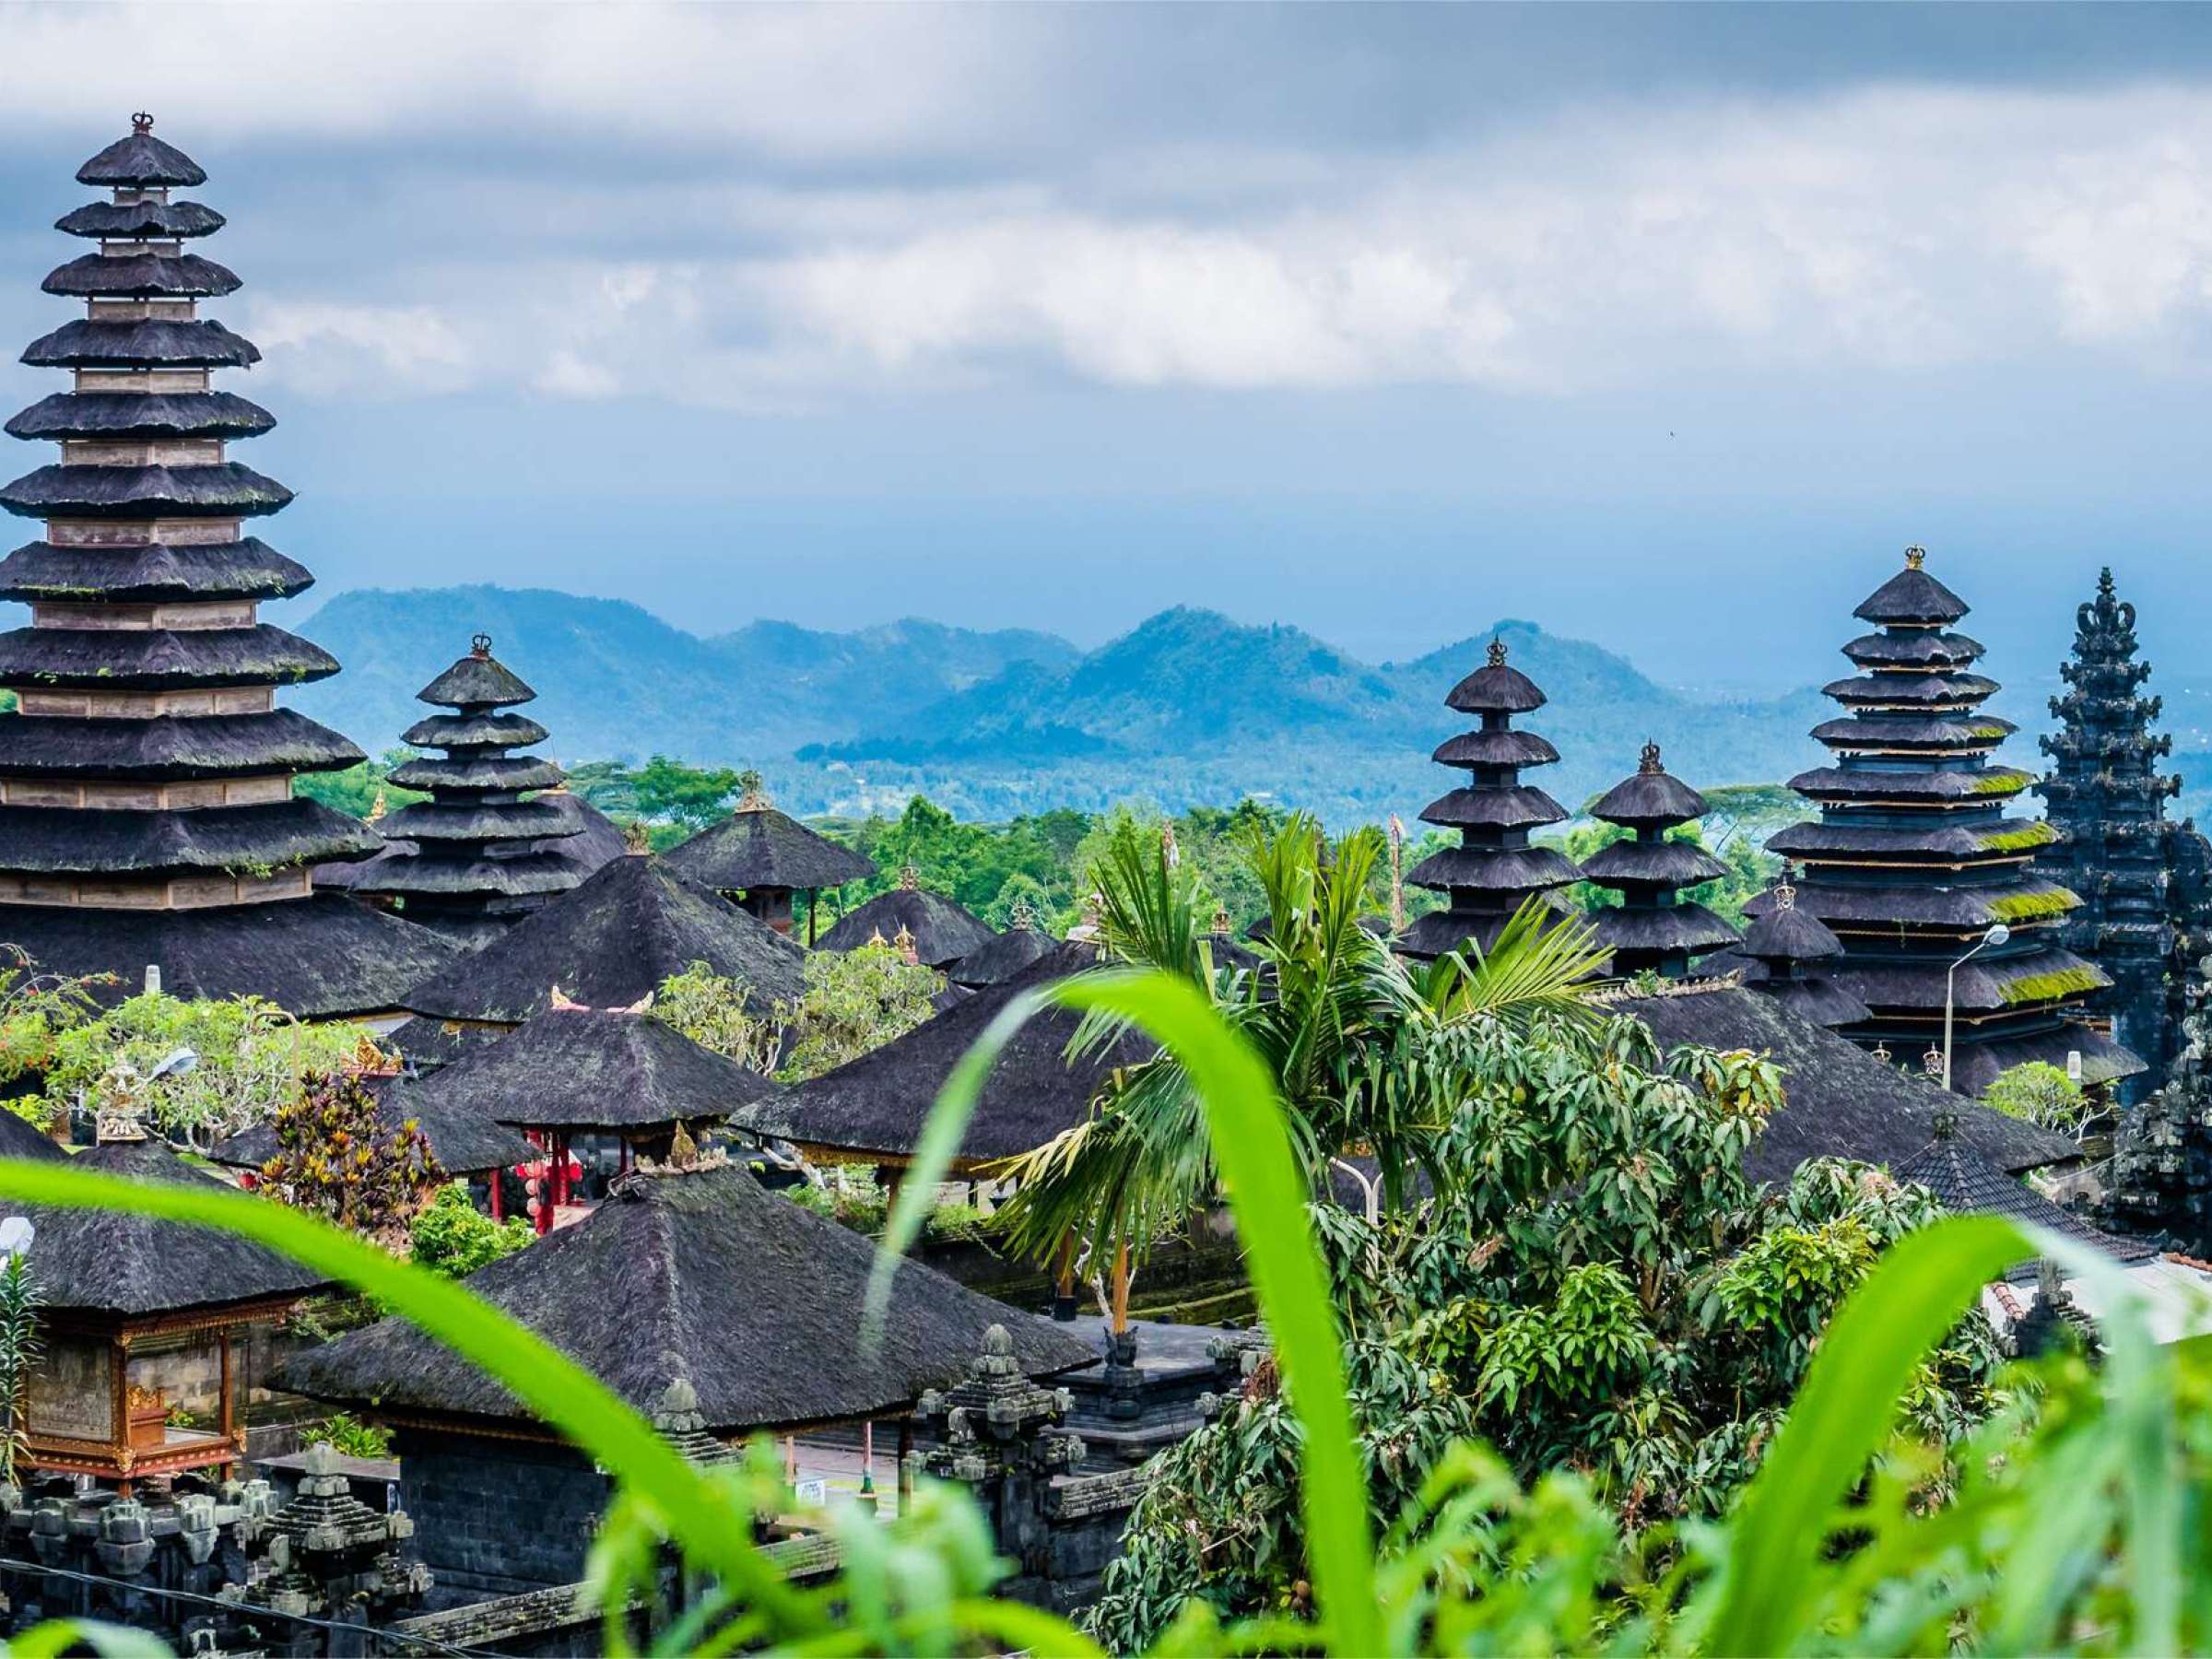 landscape picture of Balinese temples and greenery with mountains in the background